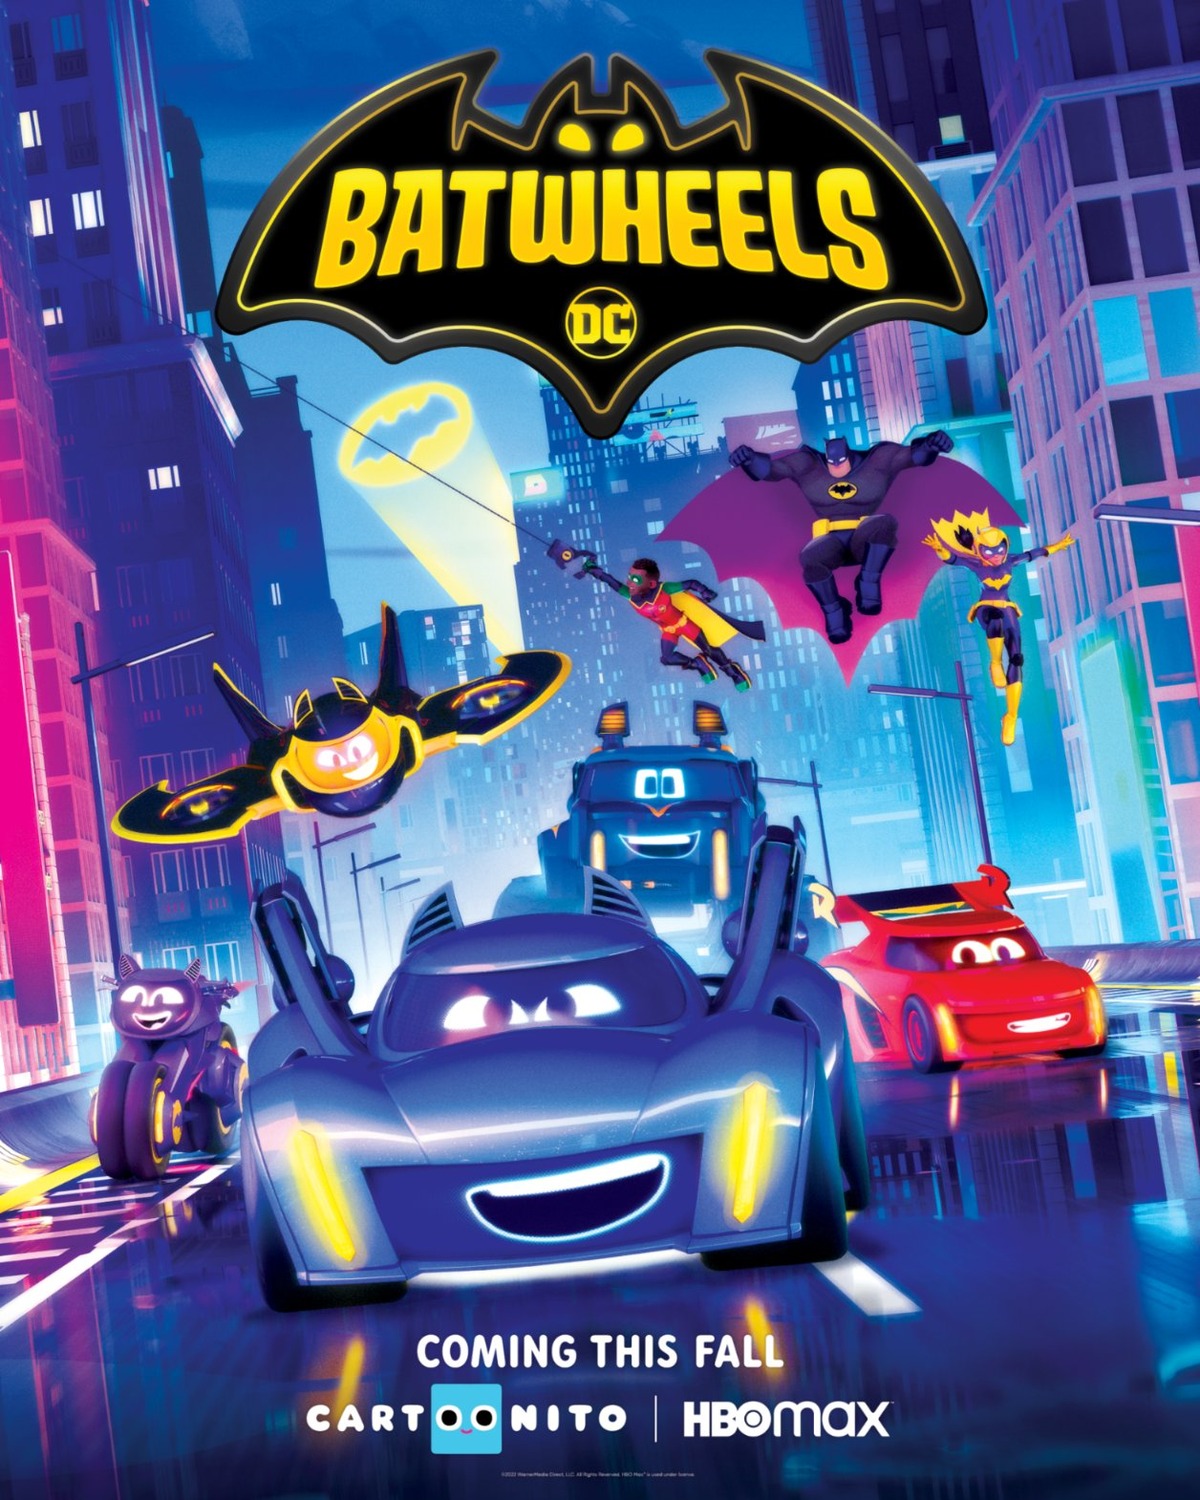 Extra Large TV Poster Image for Batwheels 